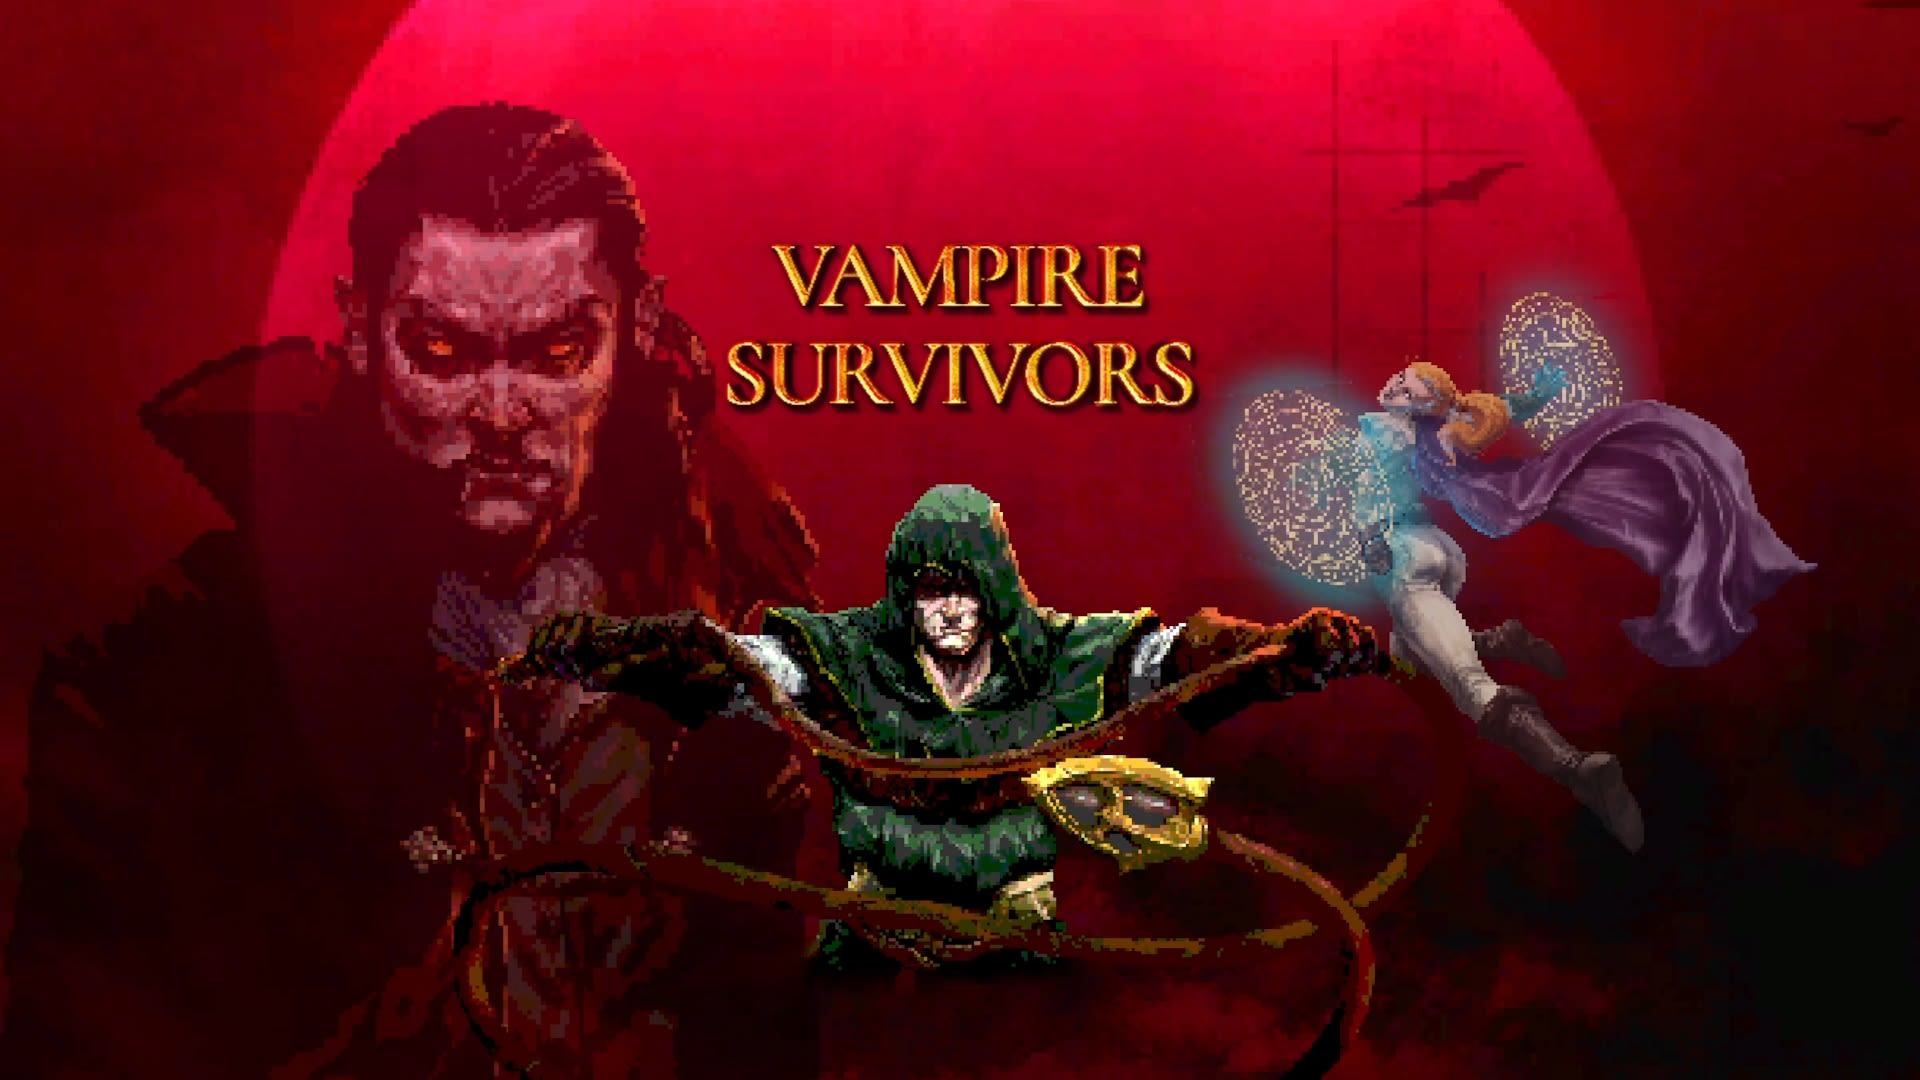 Vampire Survivors: The viral, time-sucking video game is getting